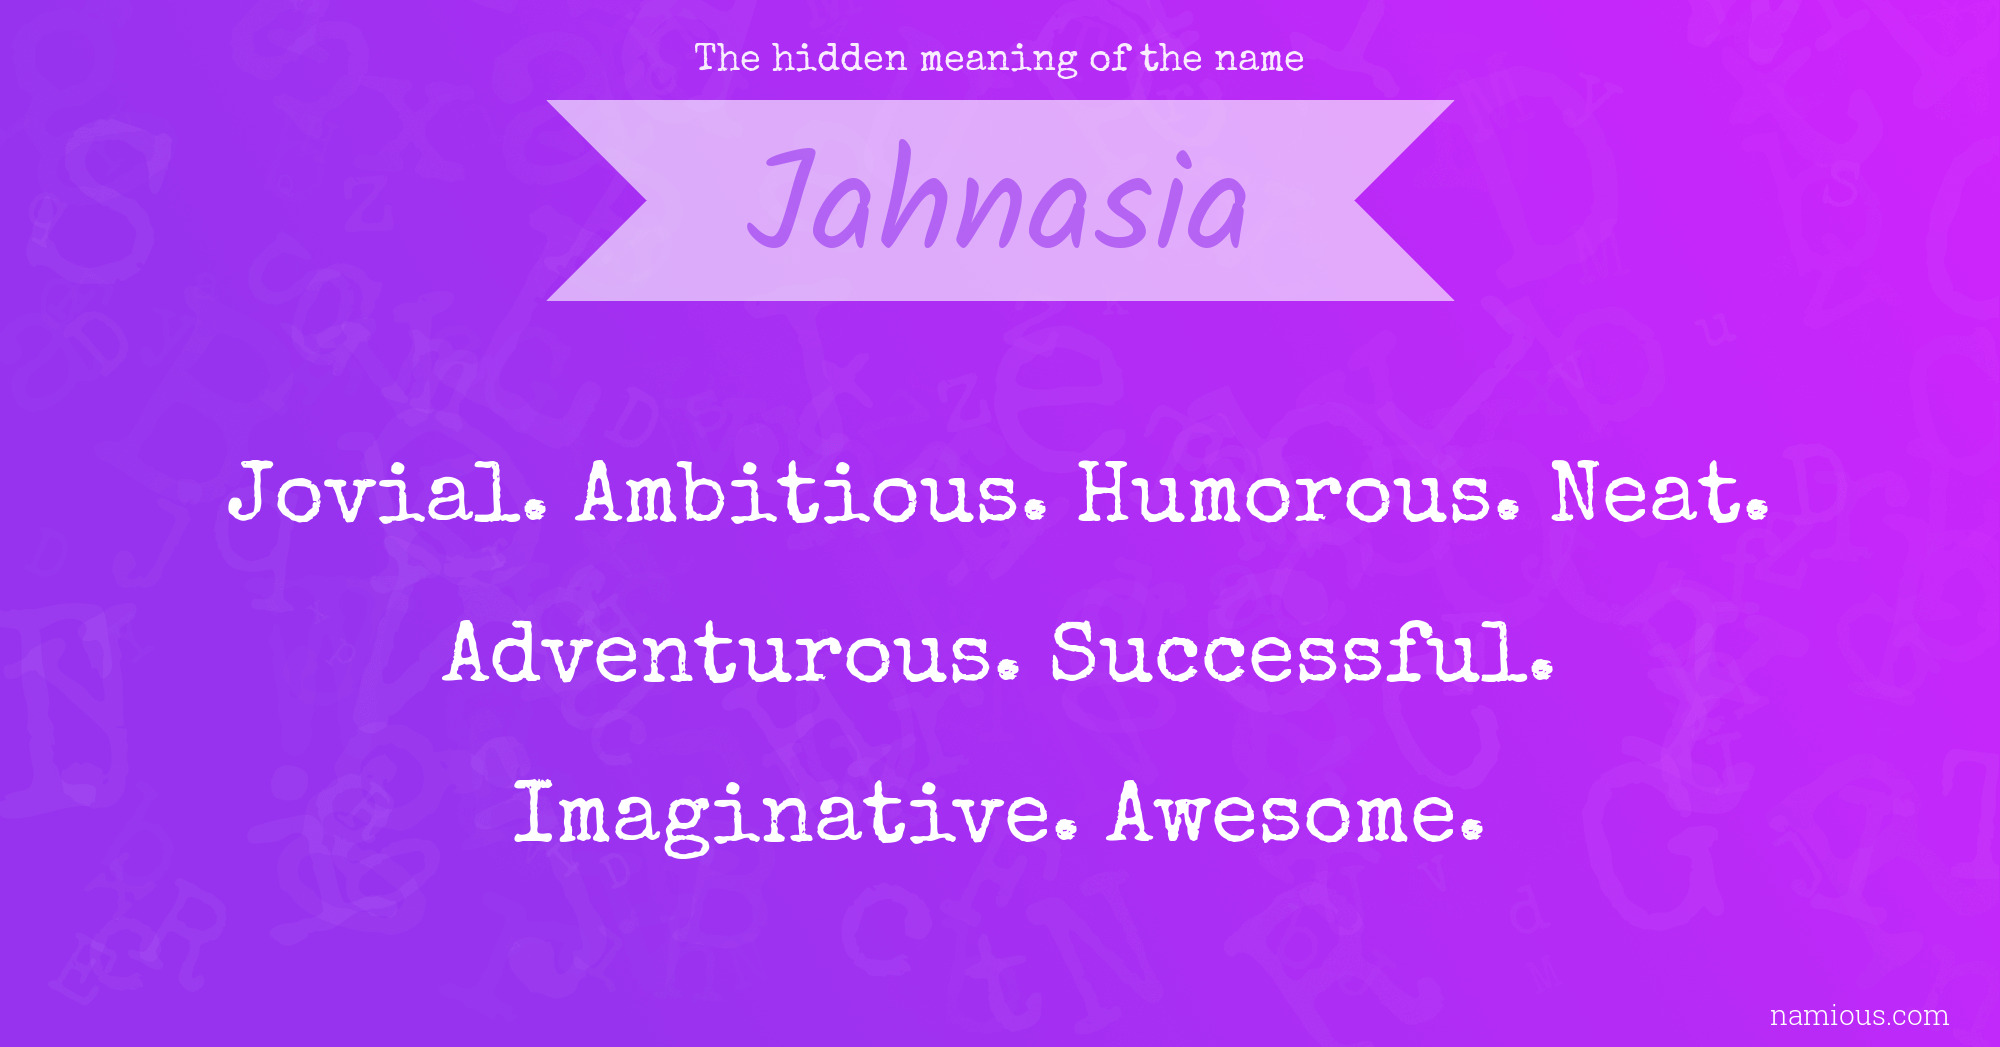 The hidden meaning of the name Jahnasia